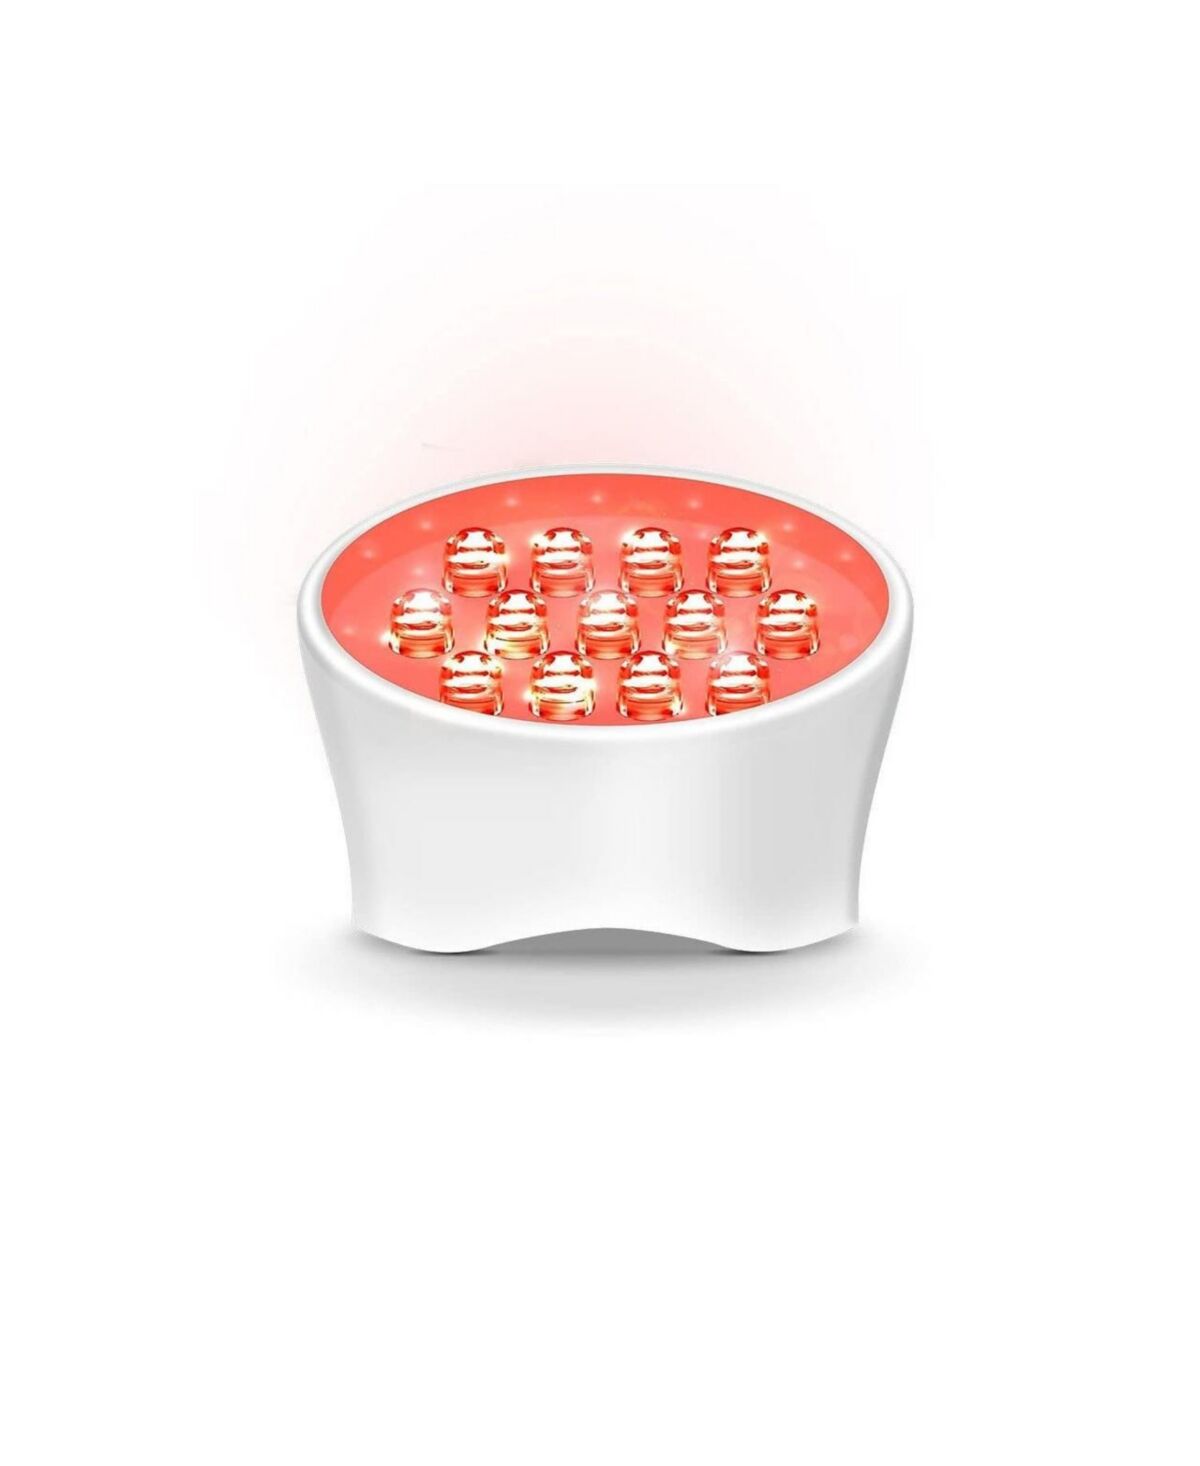 Nuovaluce Beauty Nuovaluce Red Photon Light Attachment Head - Facial Light Therapy for Skin Lifting, Tightening, Collagen Boost, Anti Aging - Use With Nuovaluce Device